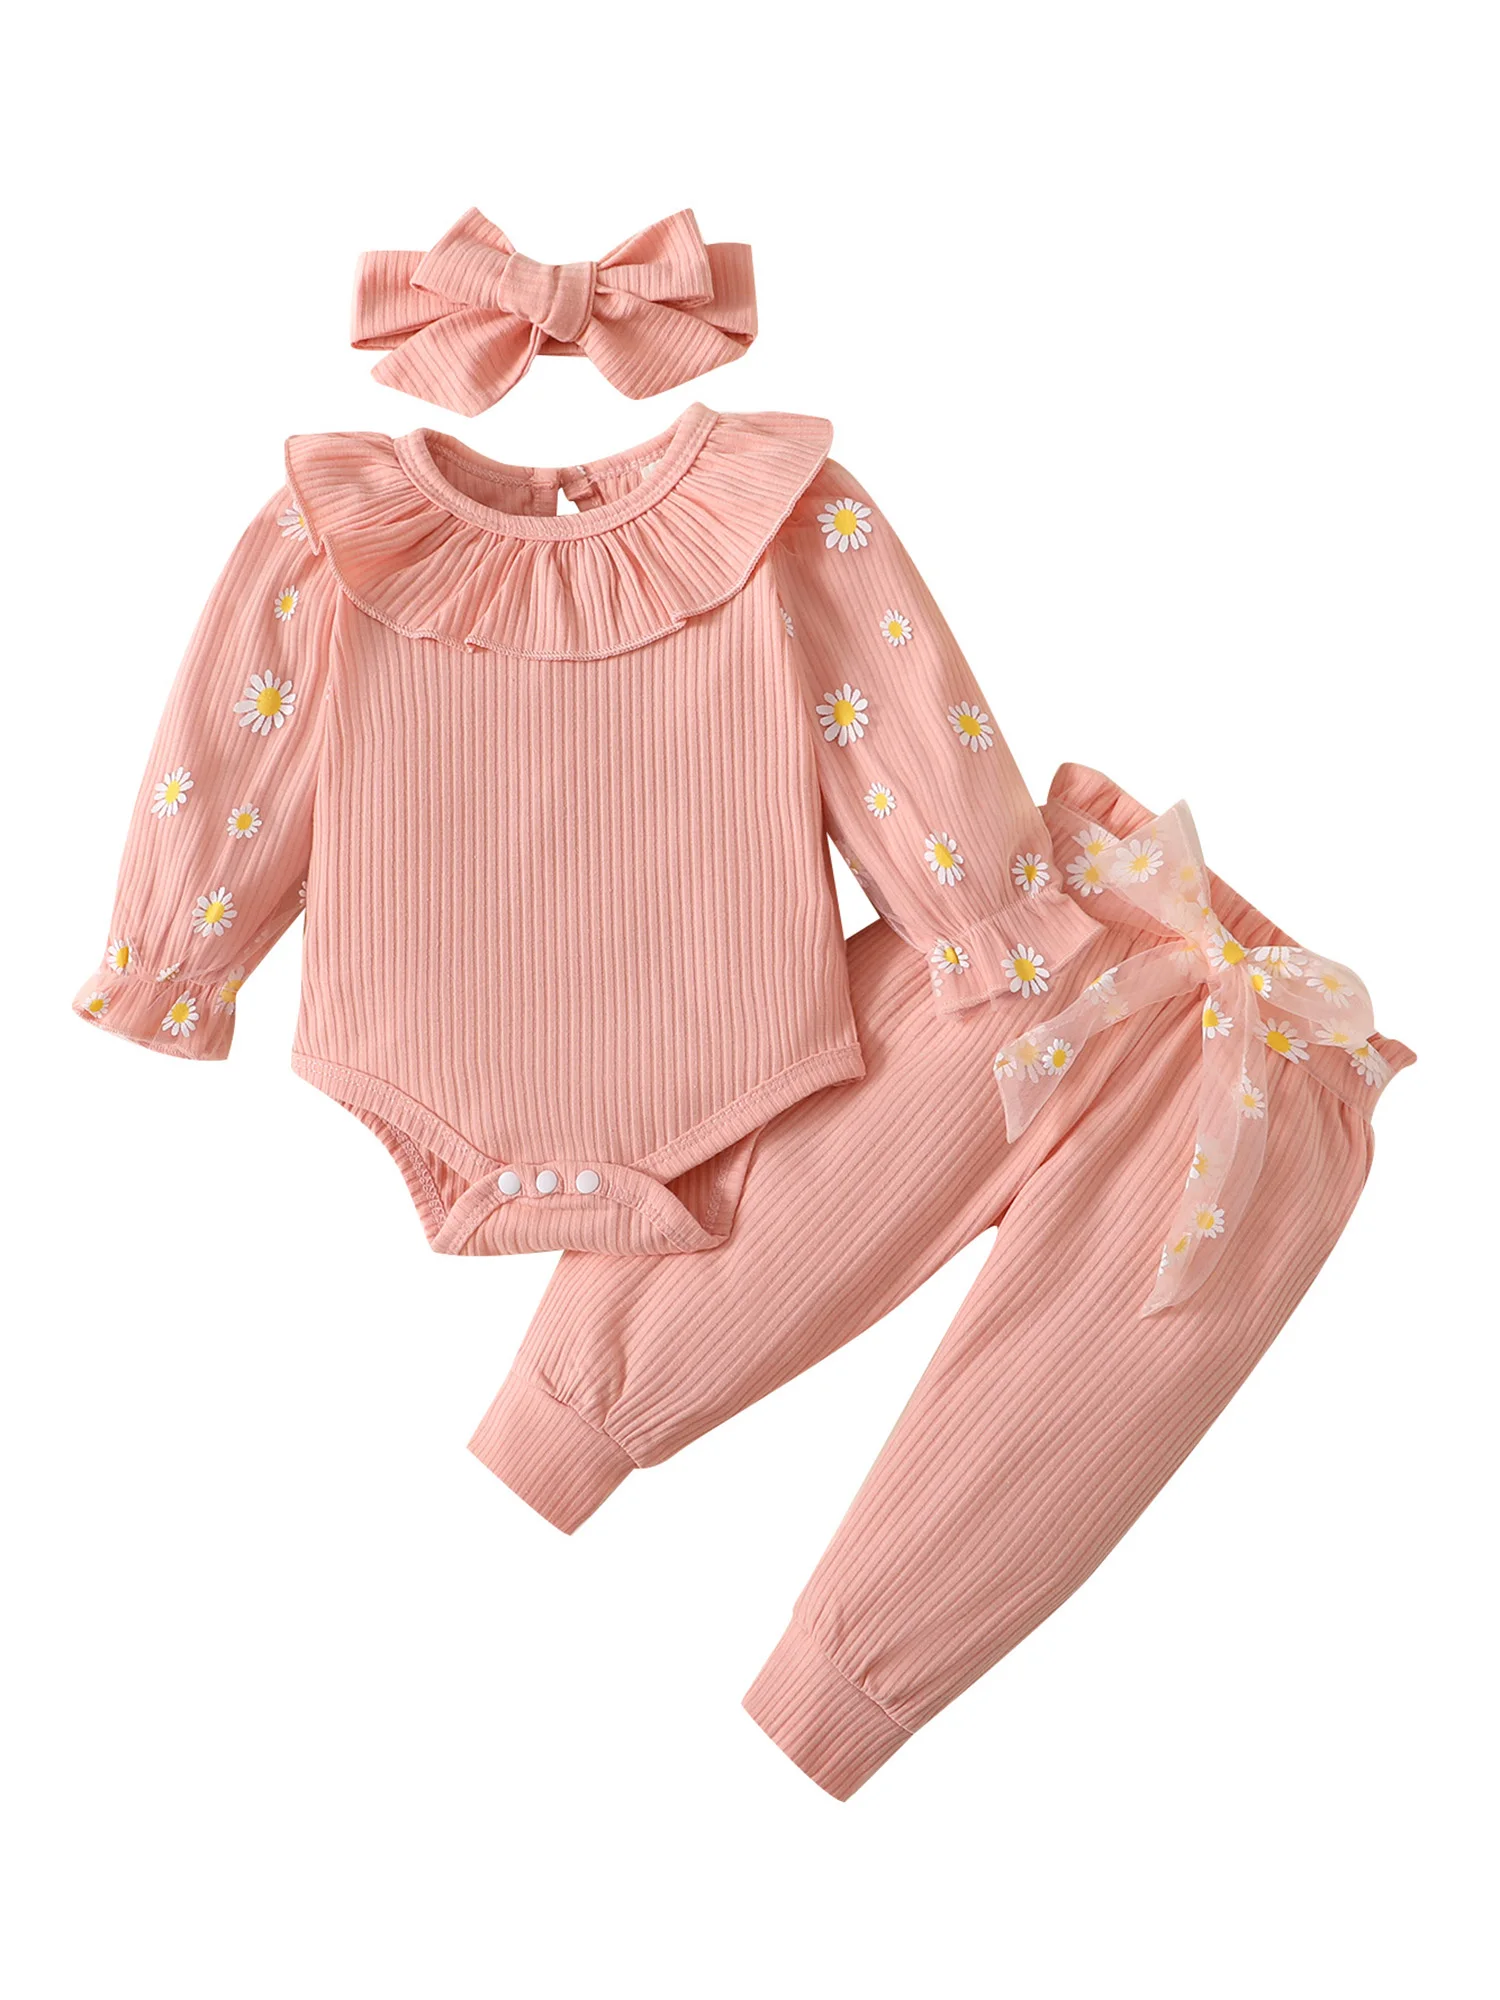 

3Pcs Baby Girls Fall Outfit Daisy Print Long Sleeve Romper Belted Pants Headband Set for Toddlers 0-18 Months